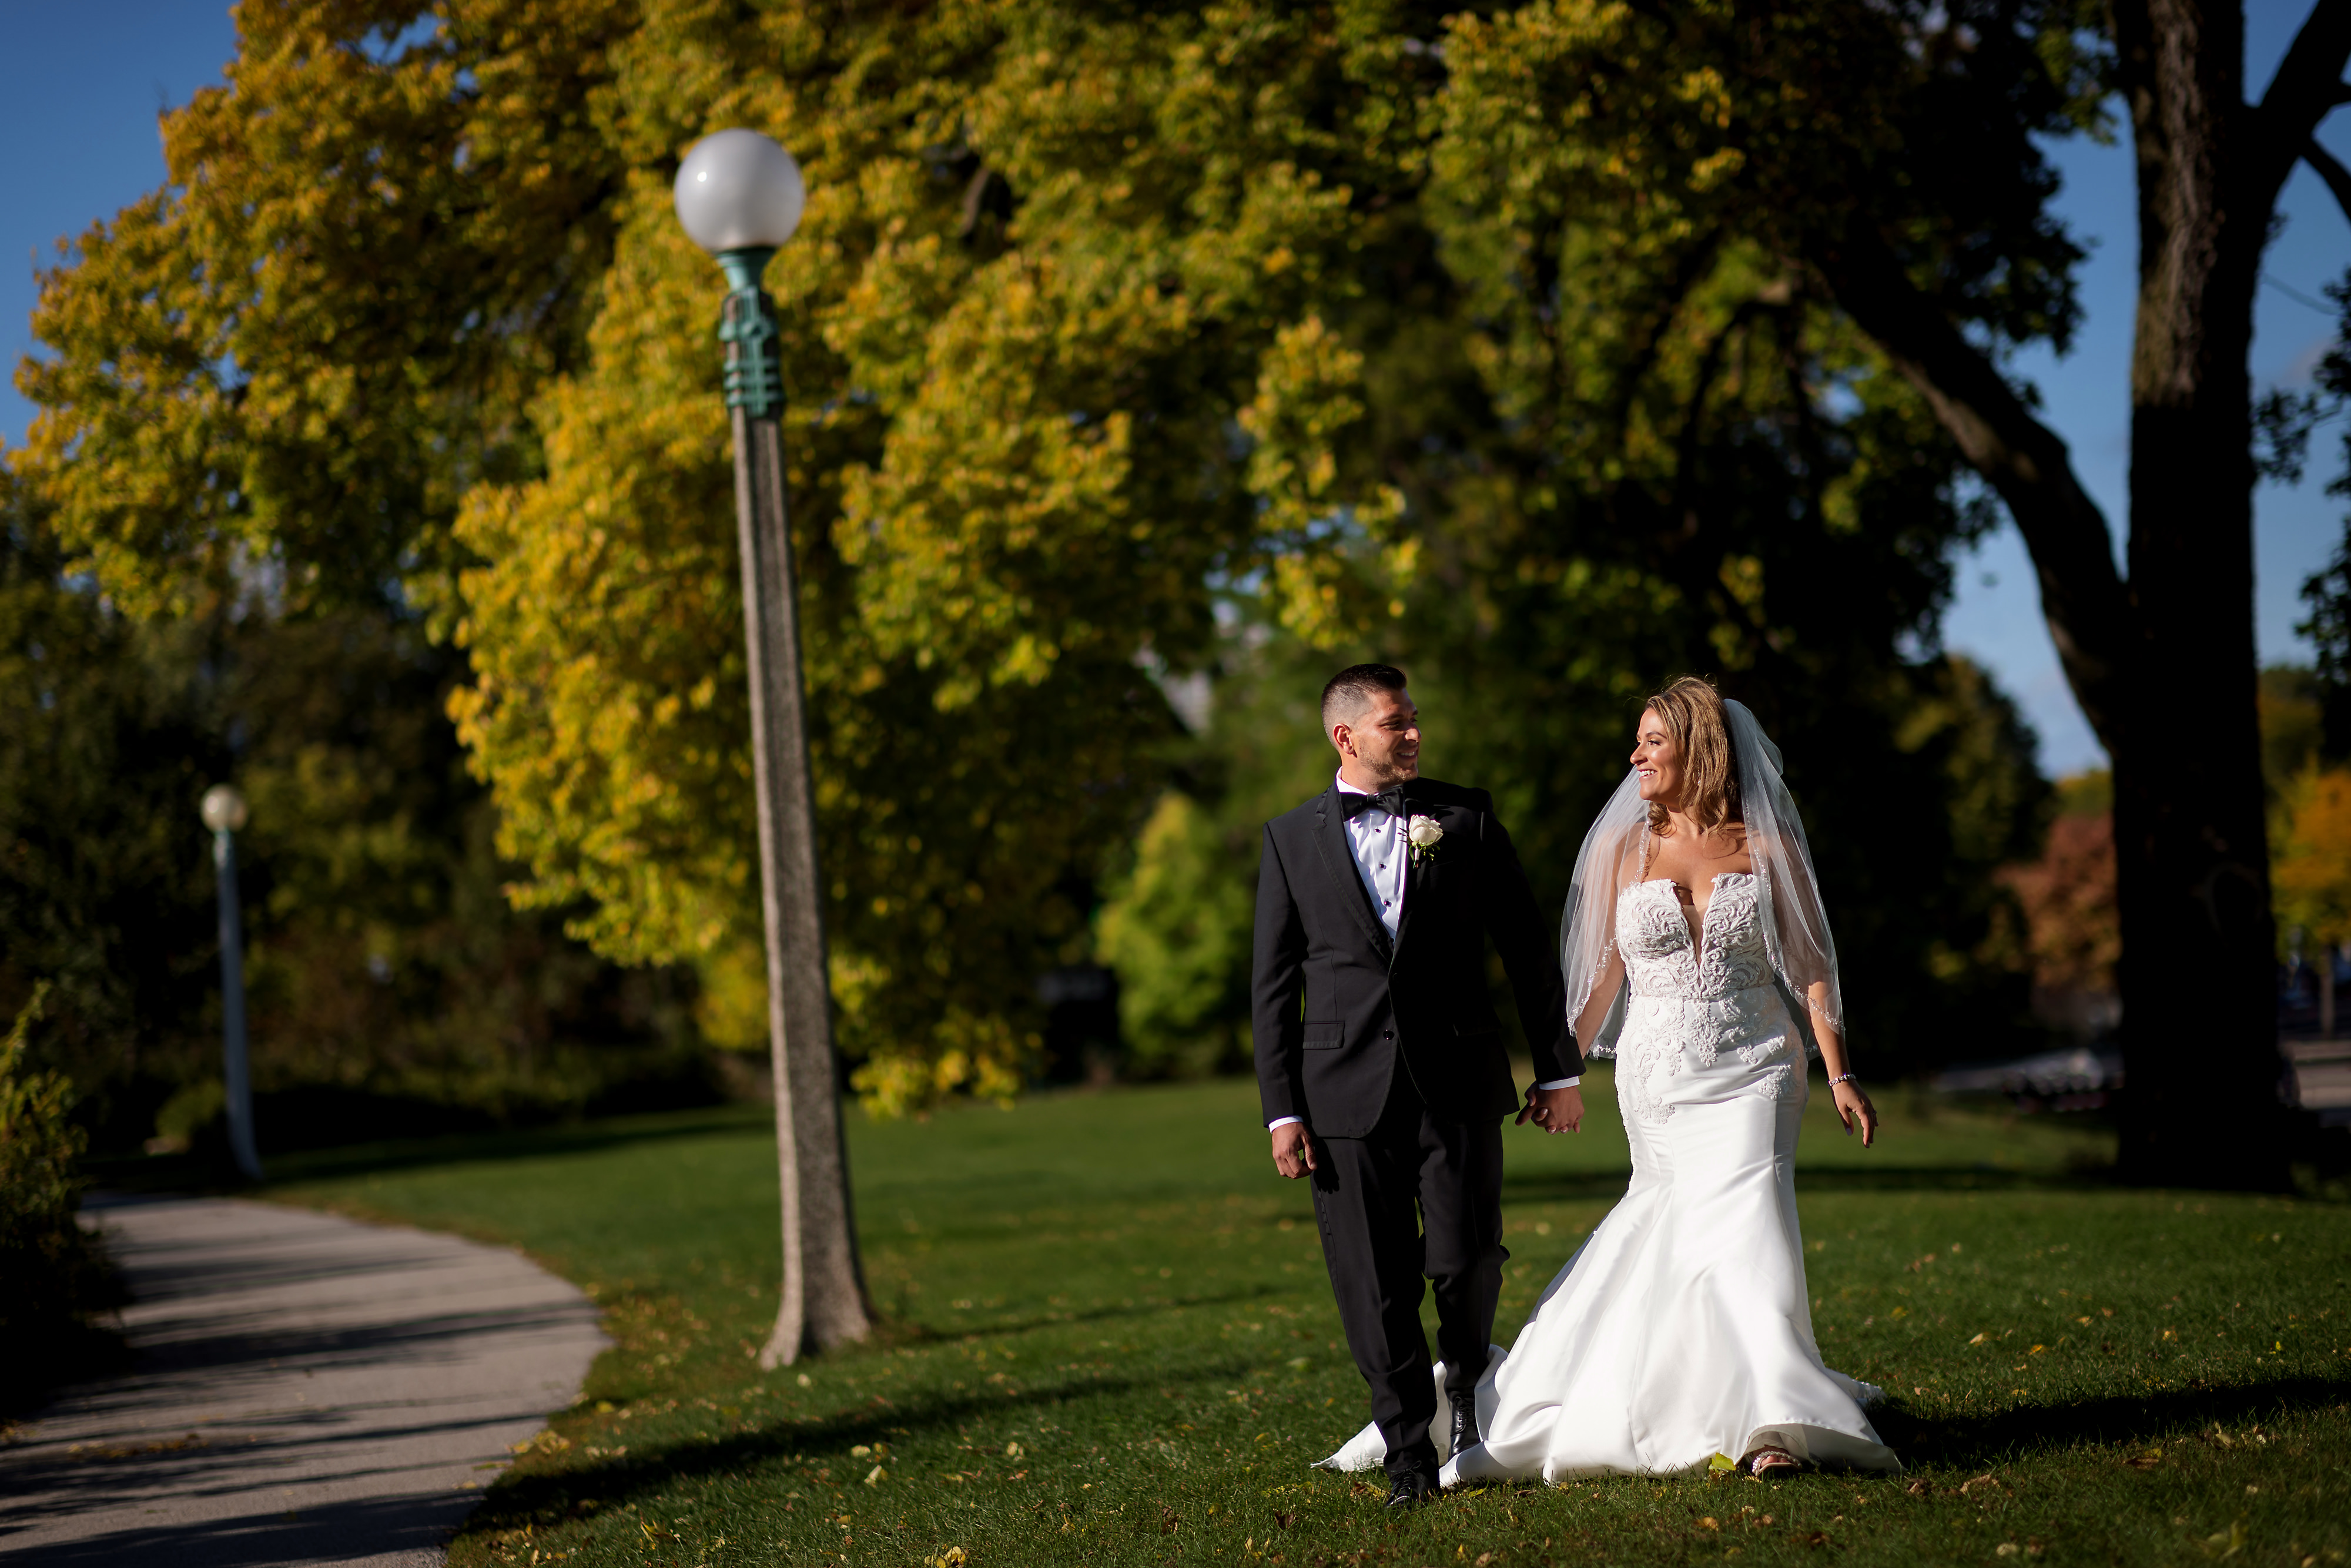 Bride and groom walk in Lincoln Park during wedding day portraits.